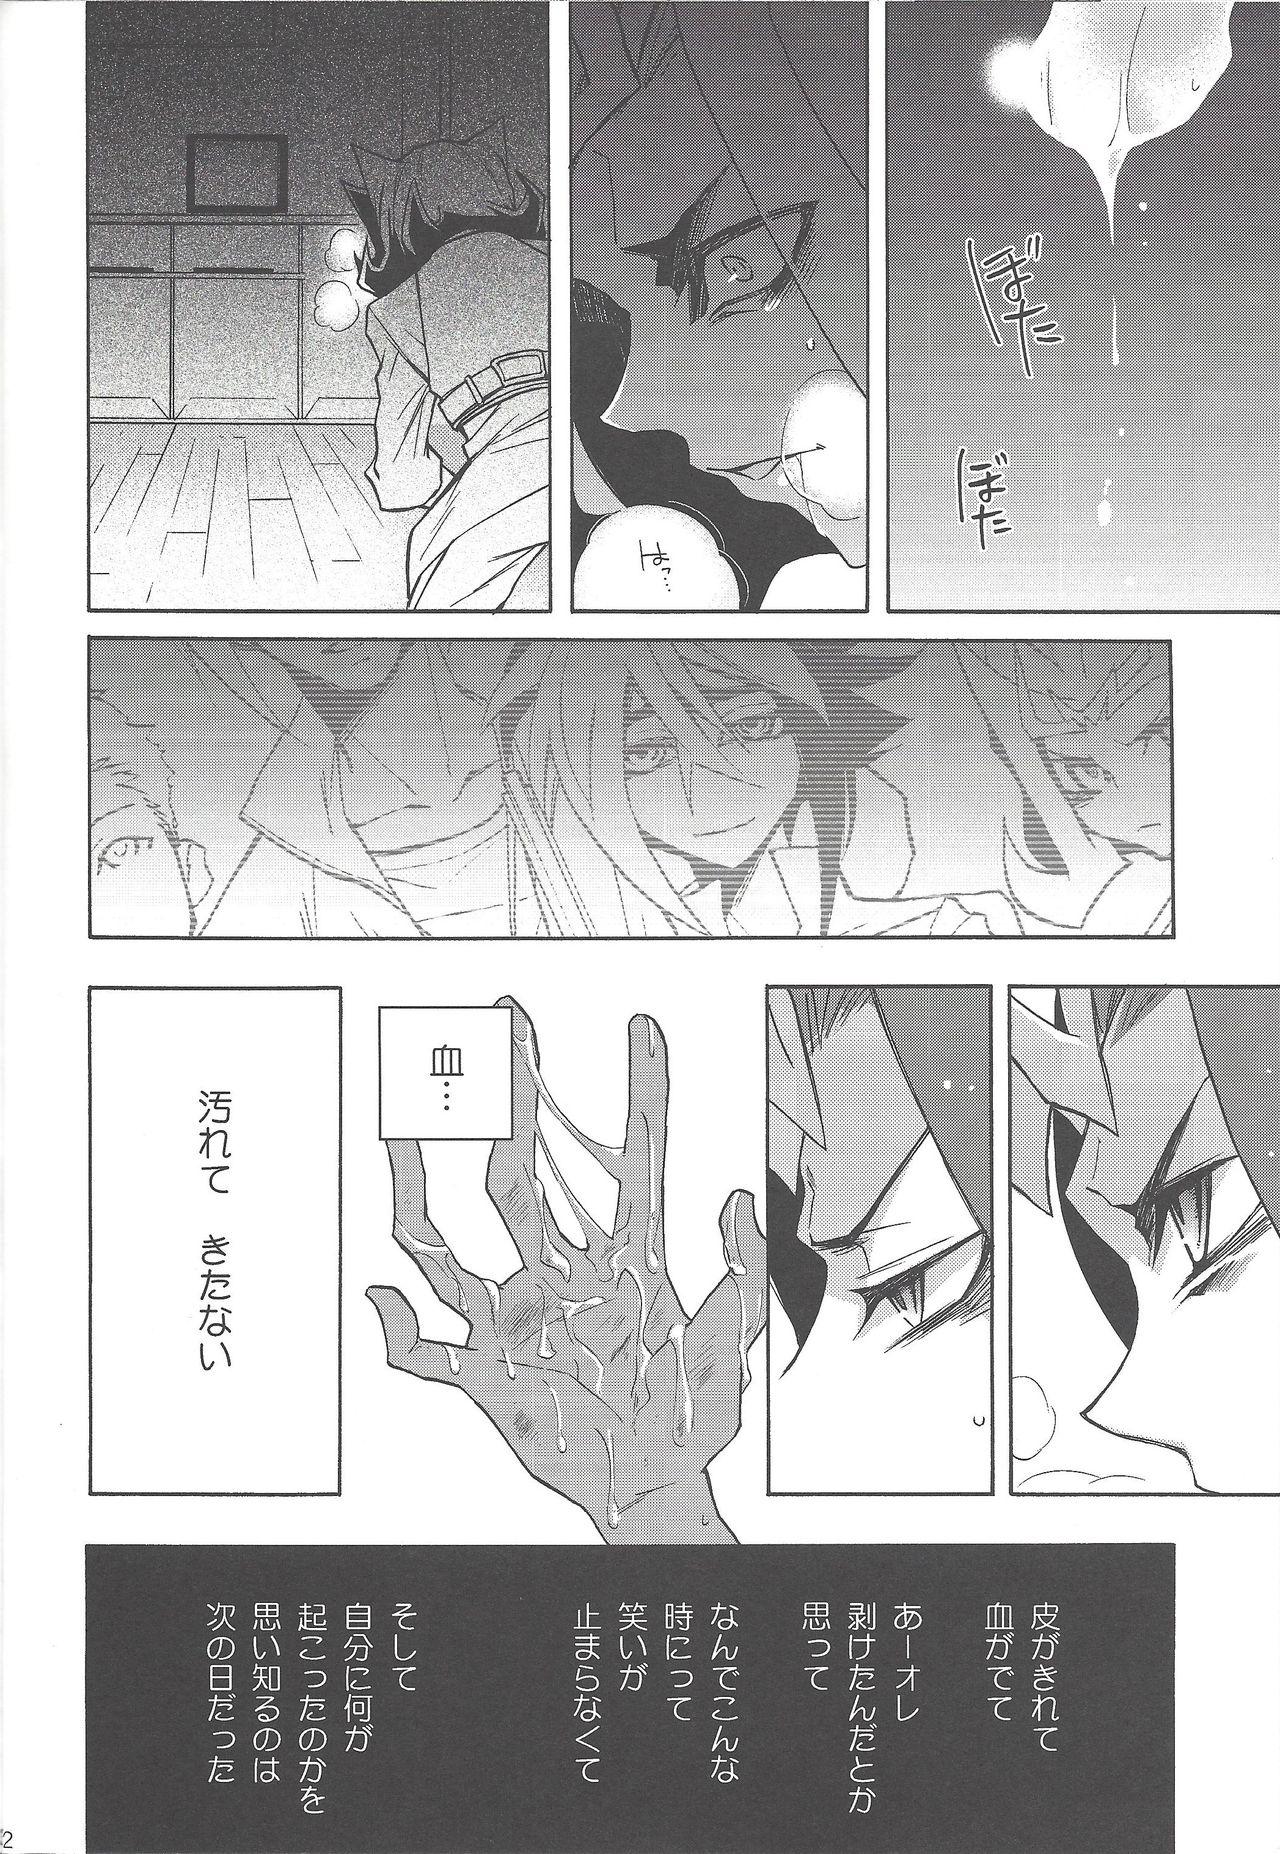 Francaise ENEMY CONTROL - Yu gi oh zexal Dykes - Page 11